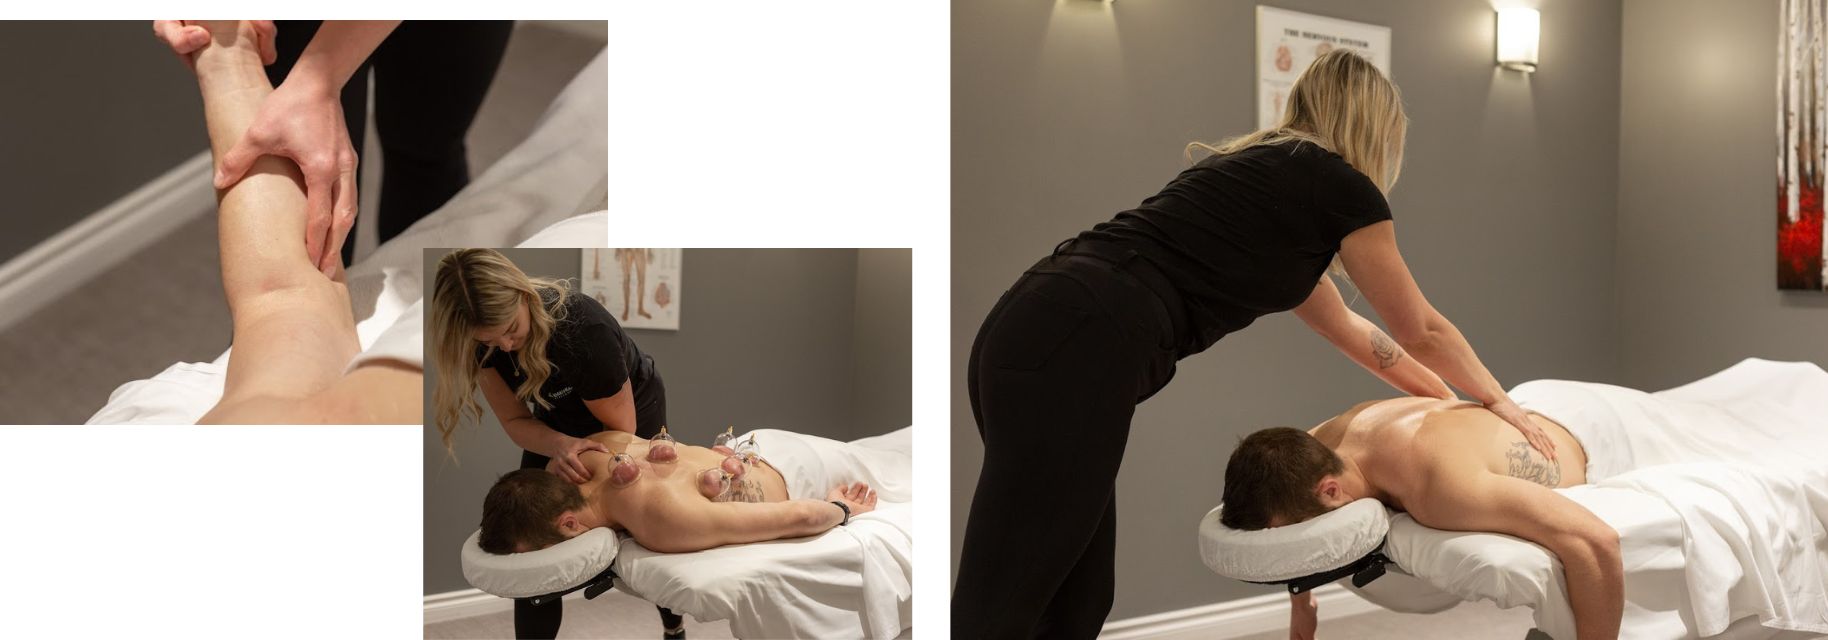 Massage Therapy Calgary South